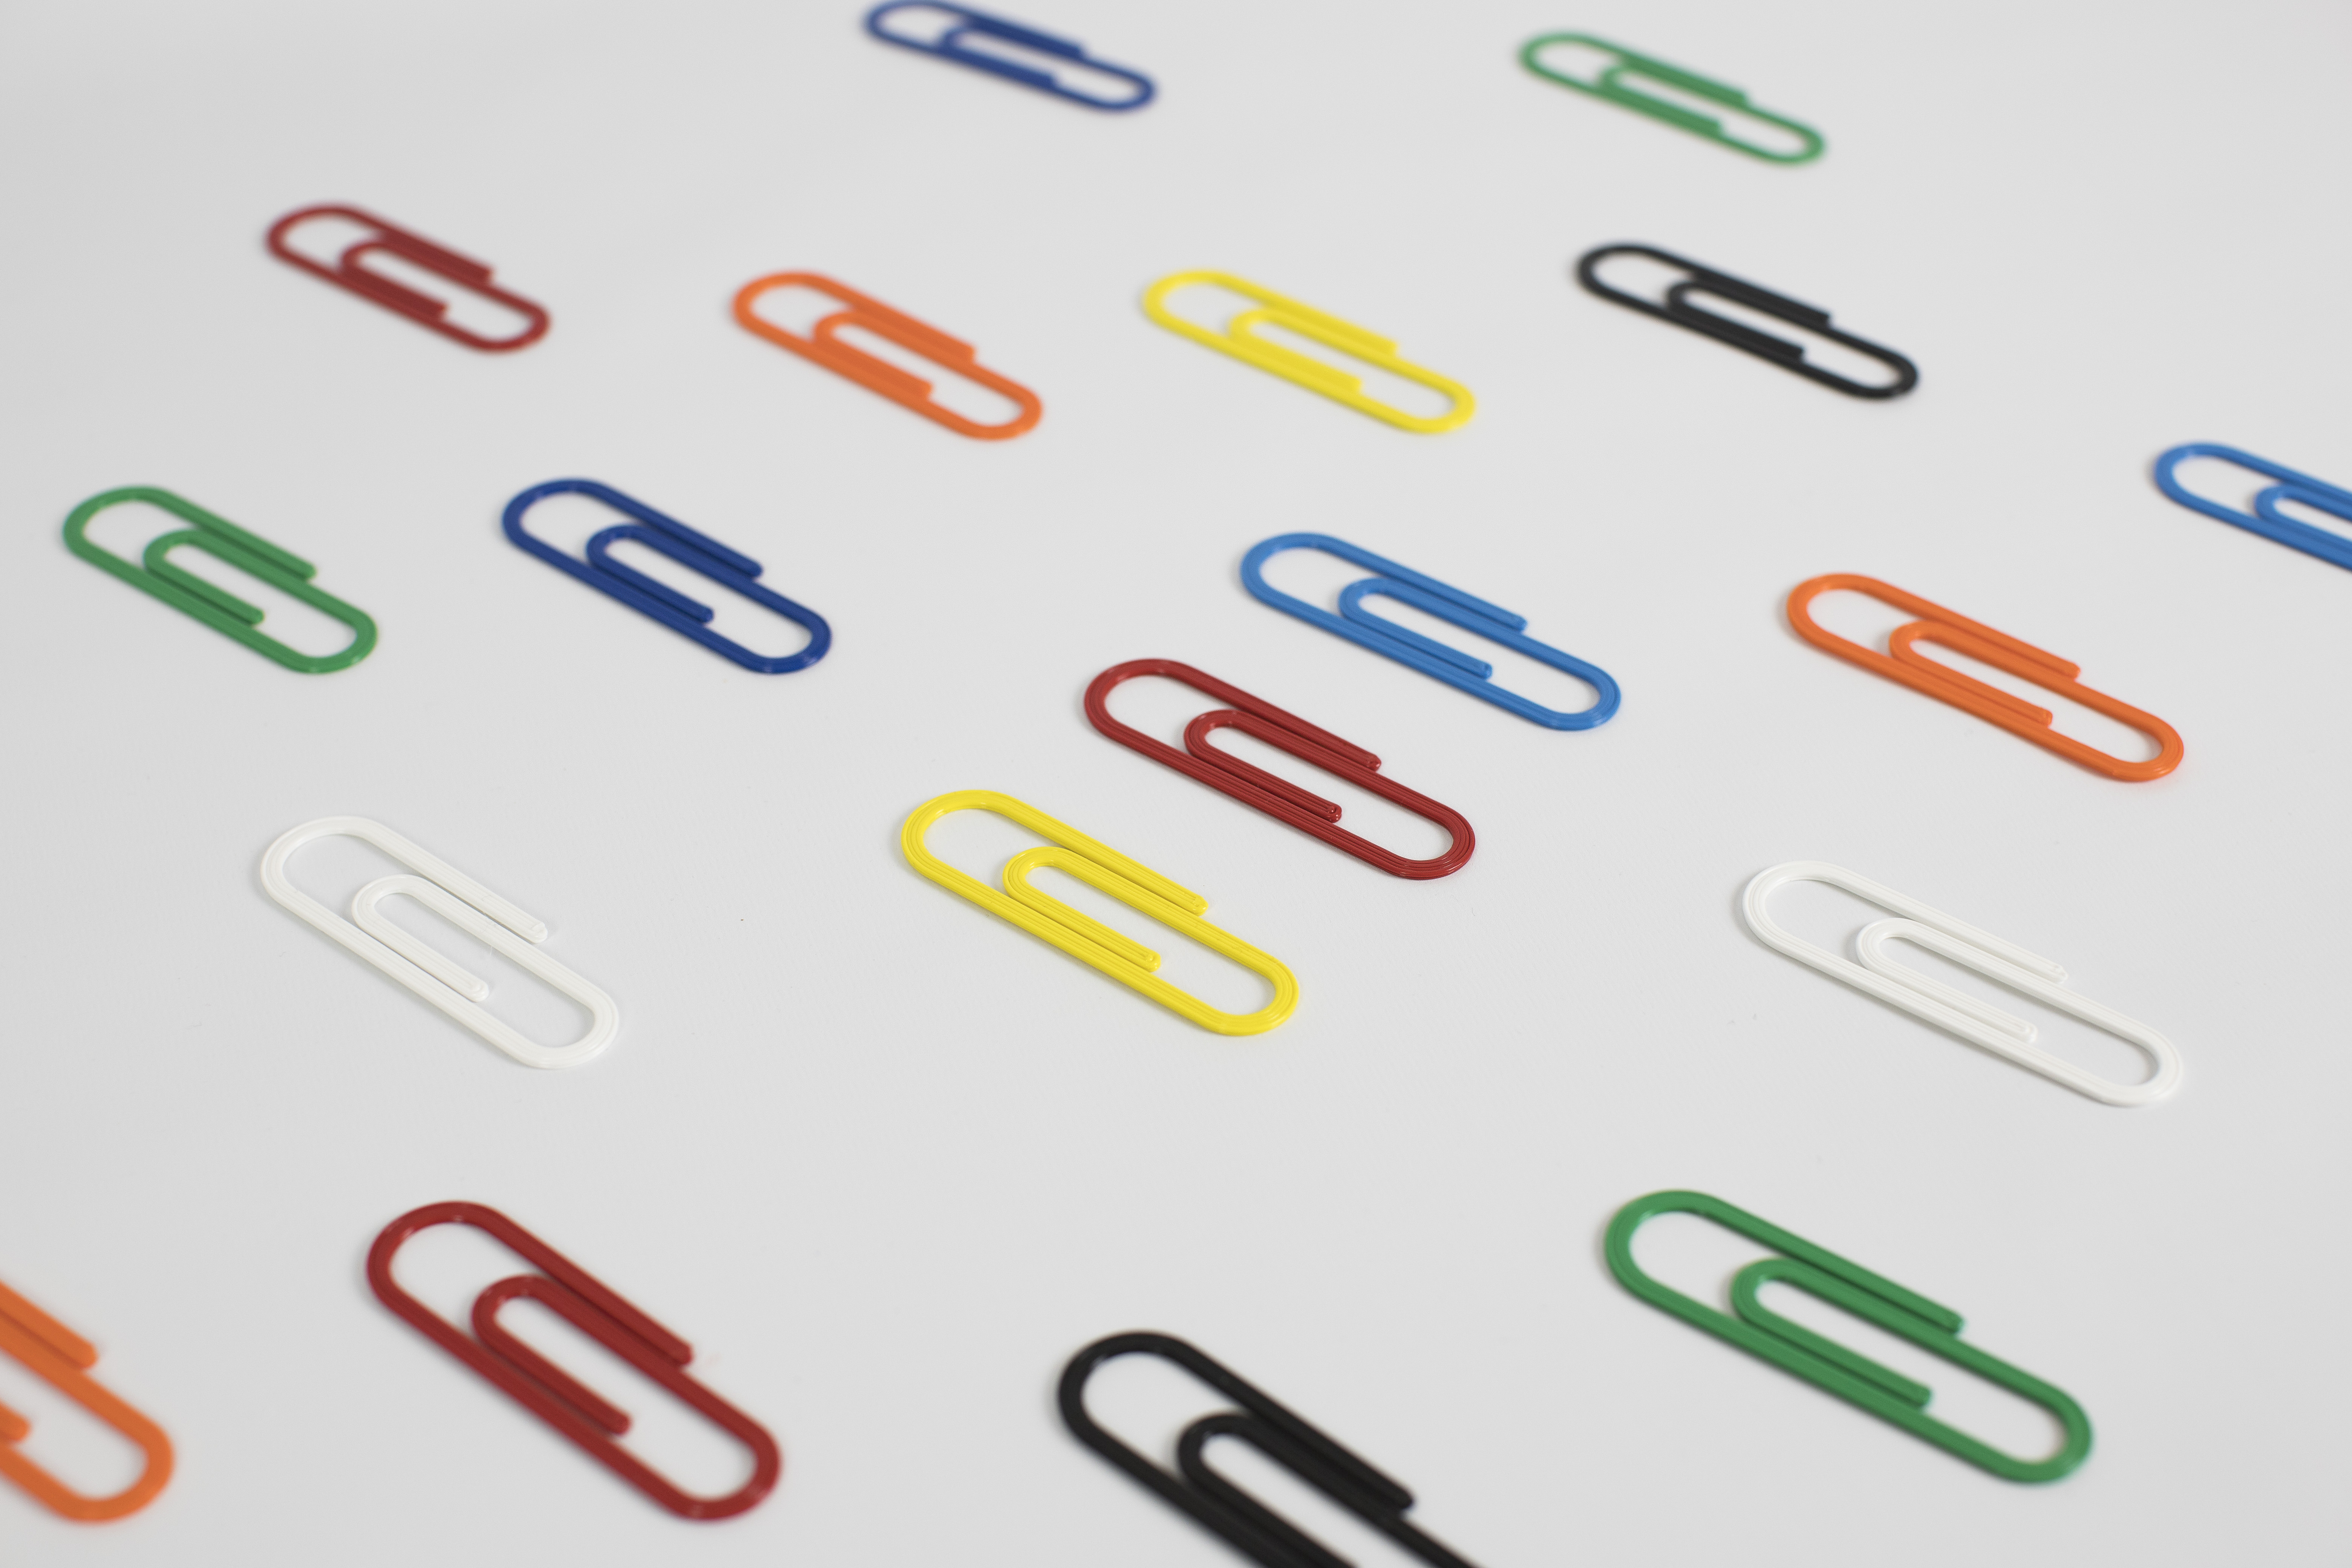 3D printed biodegradable paper clips for Paperchase. Photo via Batch.Works.